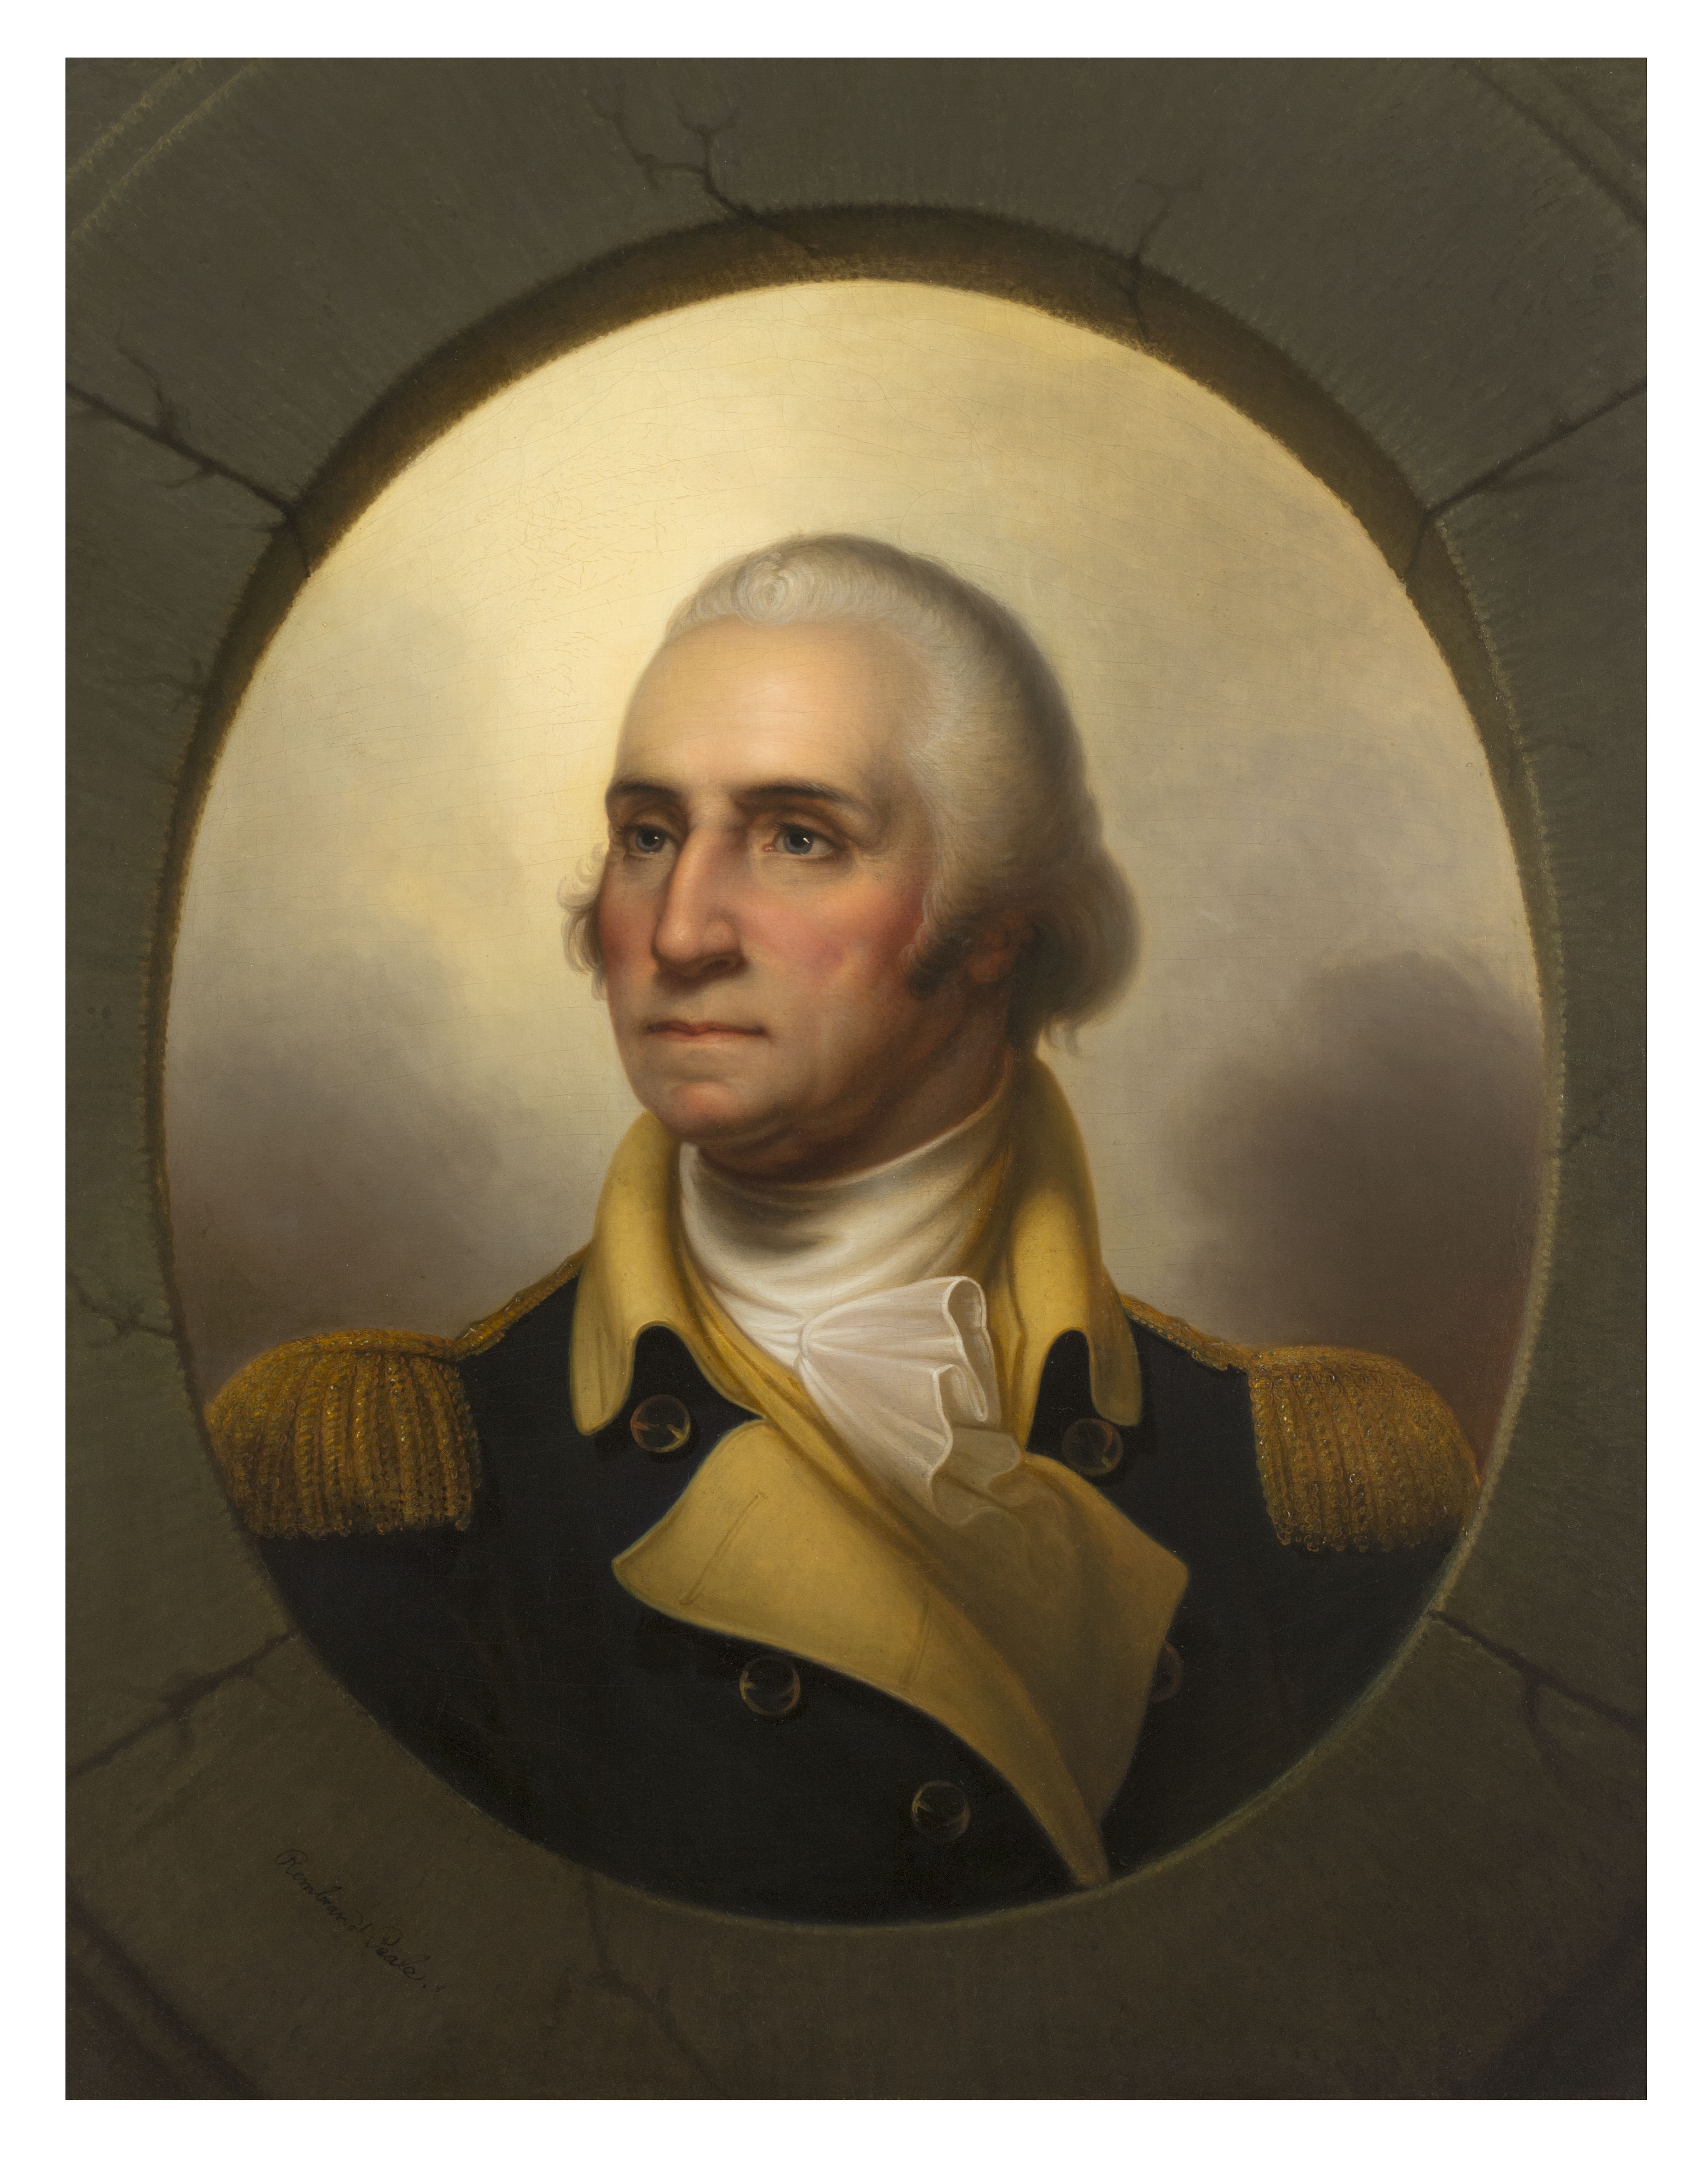 Oil painting of George Washington in military uniform by American artist Rembrandt Peale, created around 1852. Peale produced at least 79 paintings of Washington. (The Gilder Lehrman Institute, GLC09119.01)